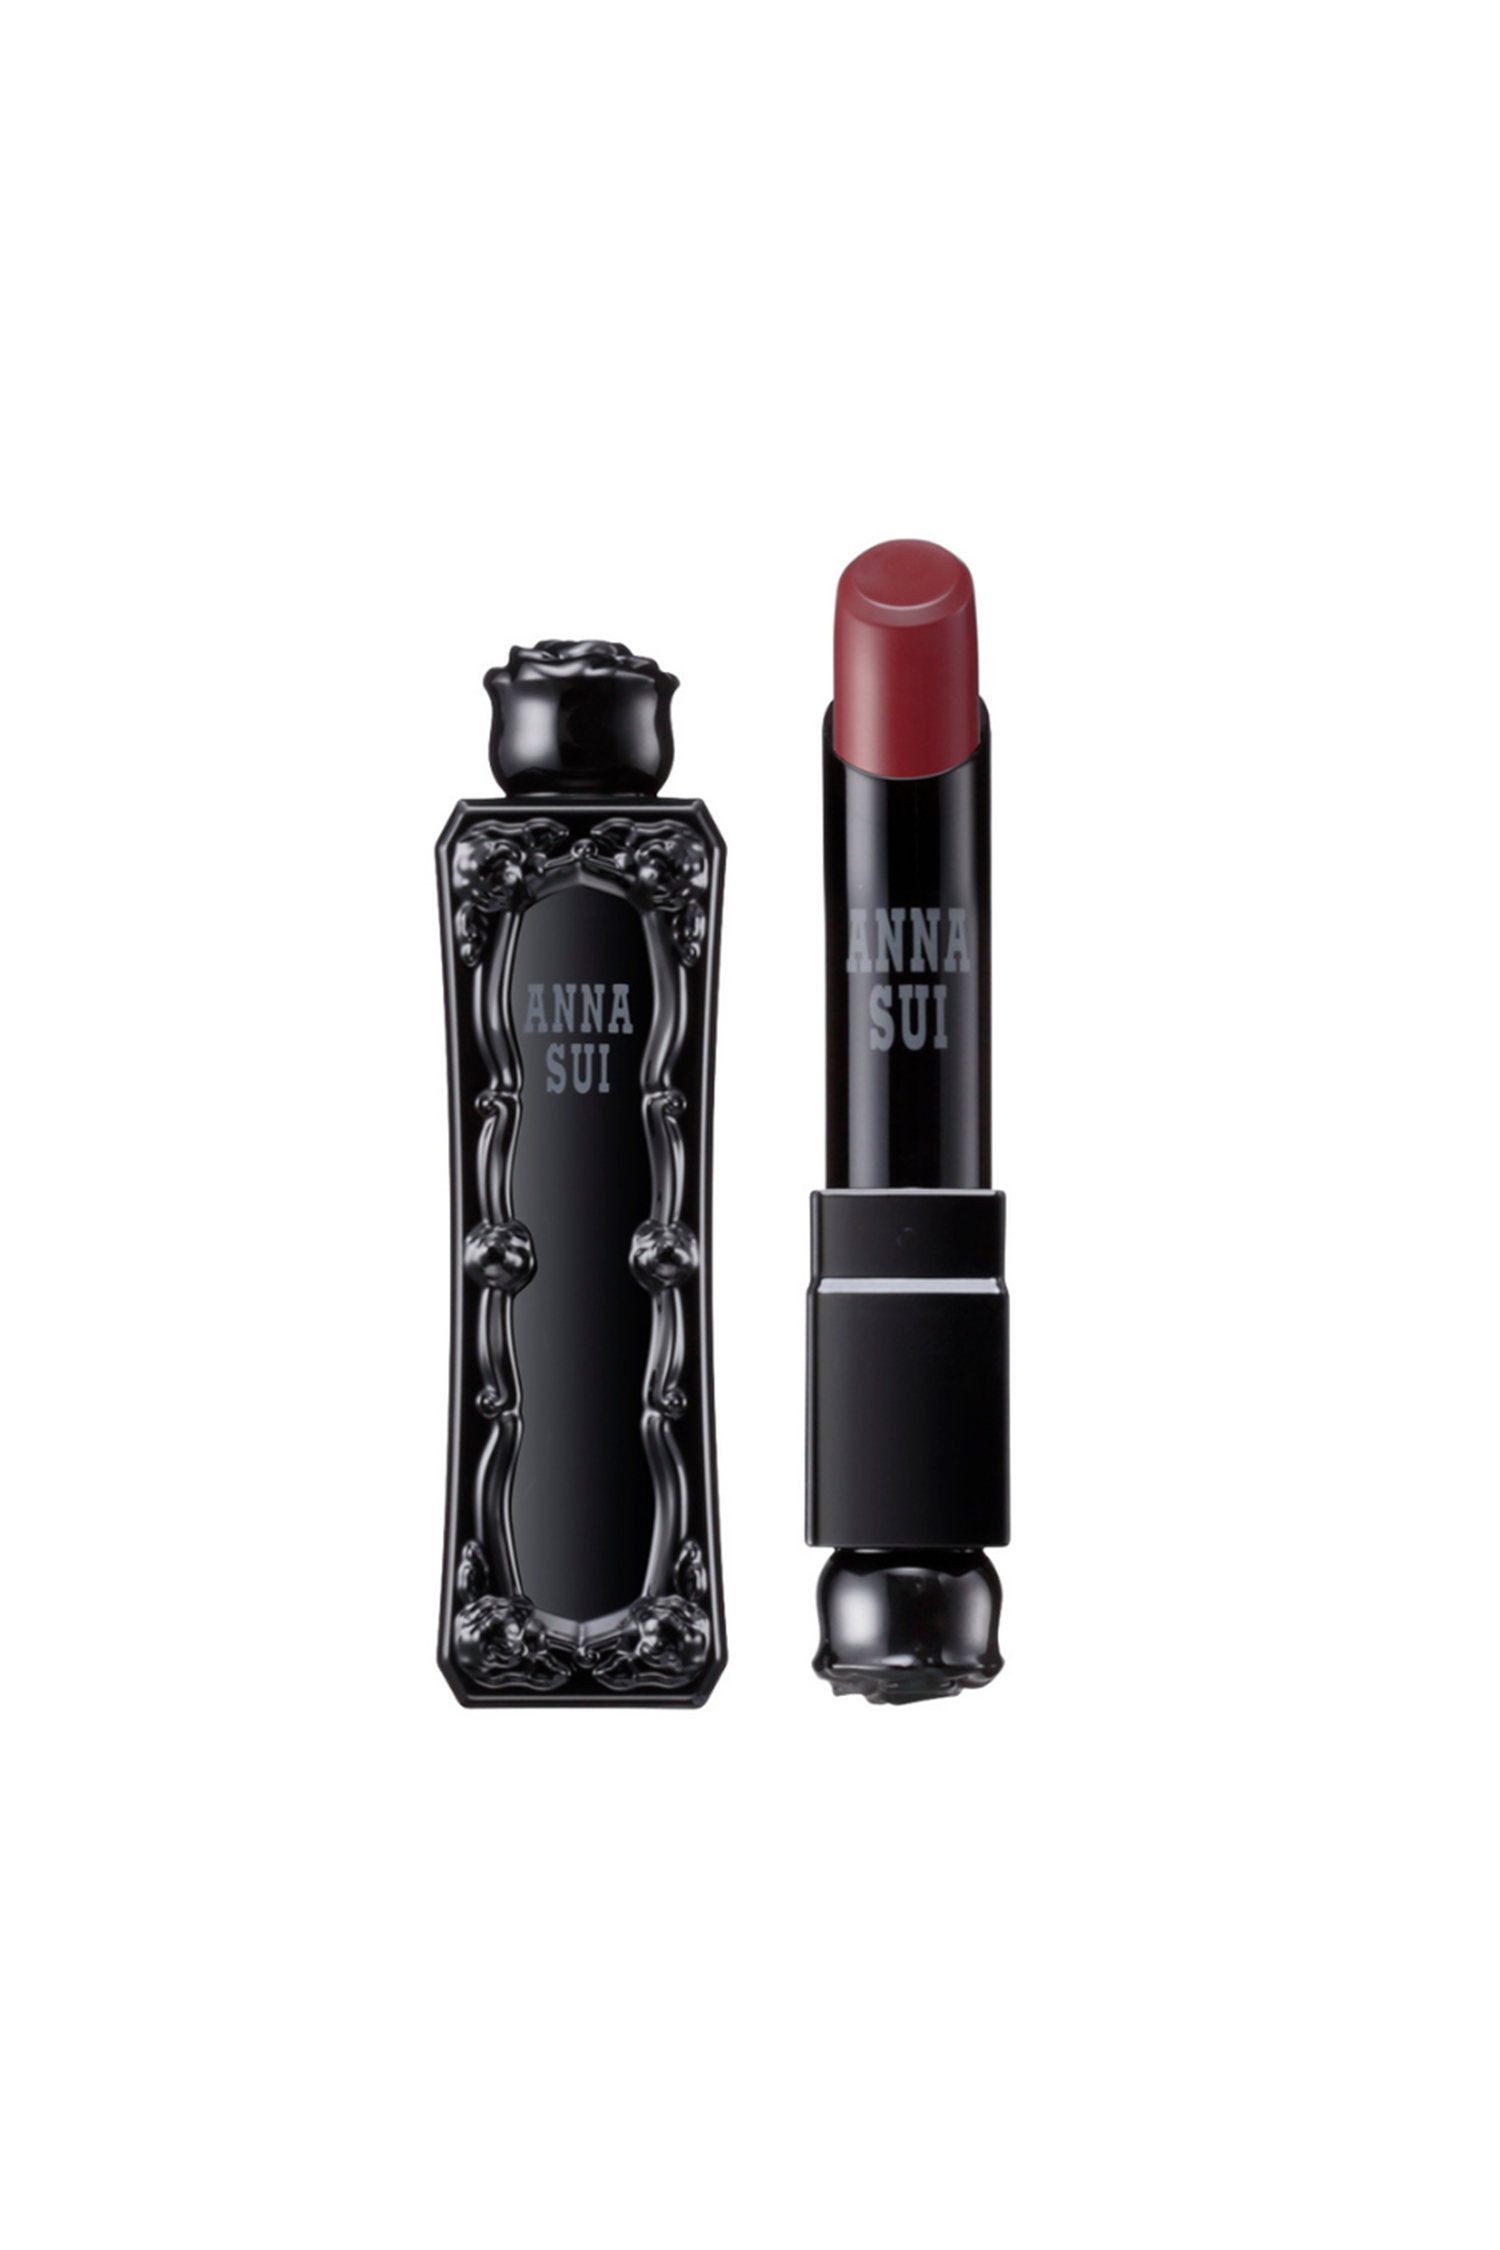 Enchanting Redlipstick, in an Anna Sui, black container with raised rose pattern, rose on top 